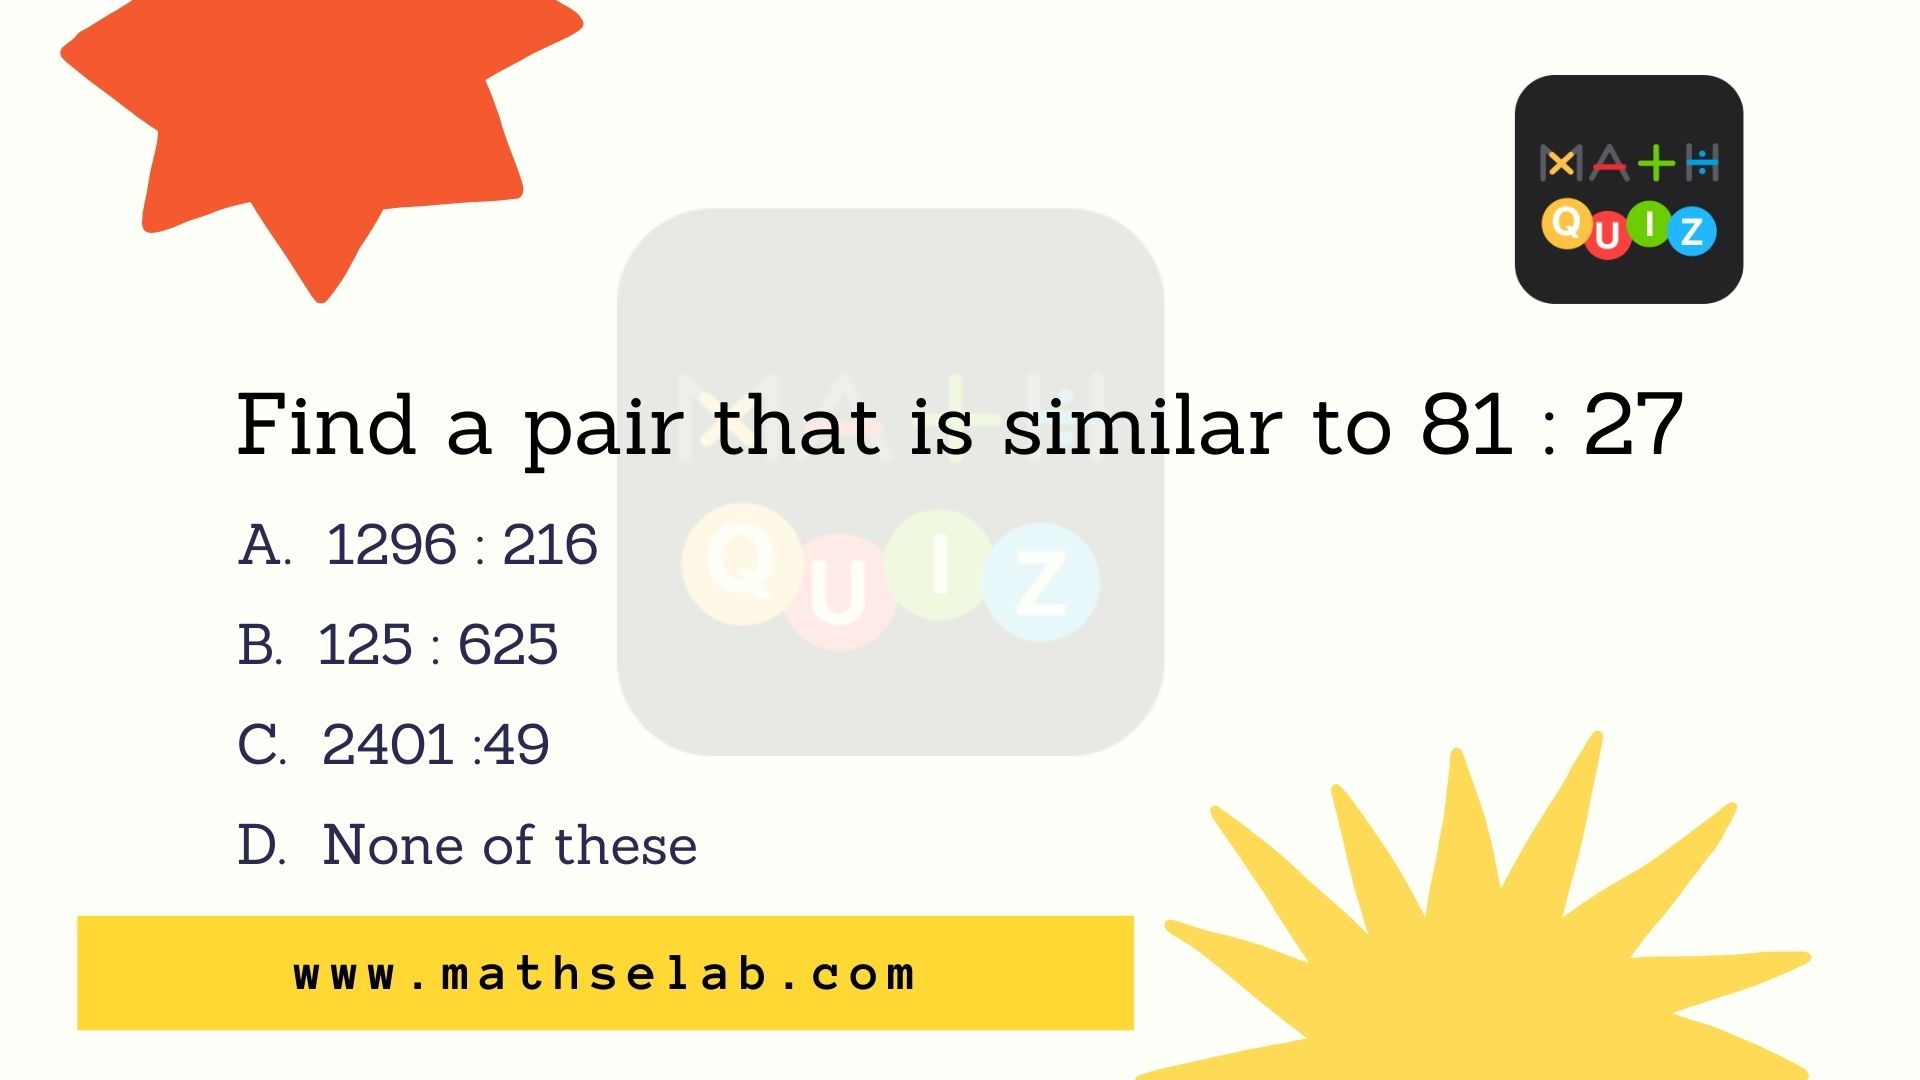 Find a pair that is similar to 81 : 27 - mathselab.com